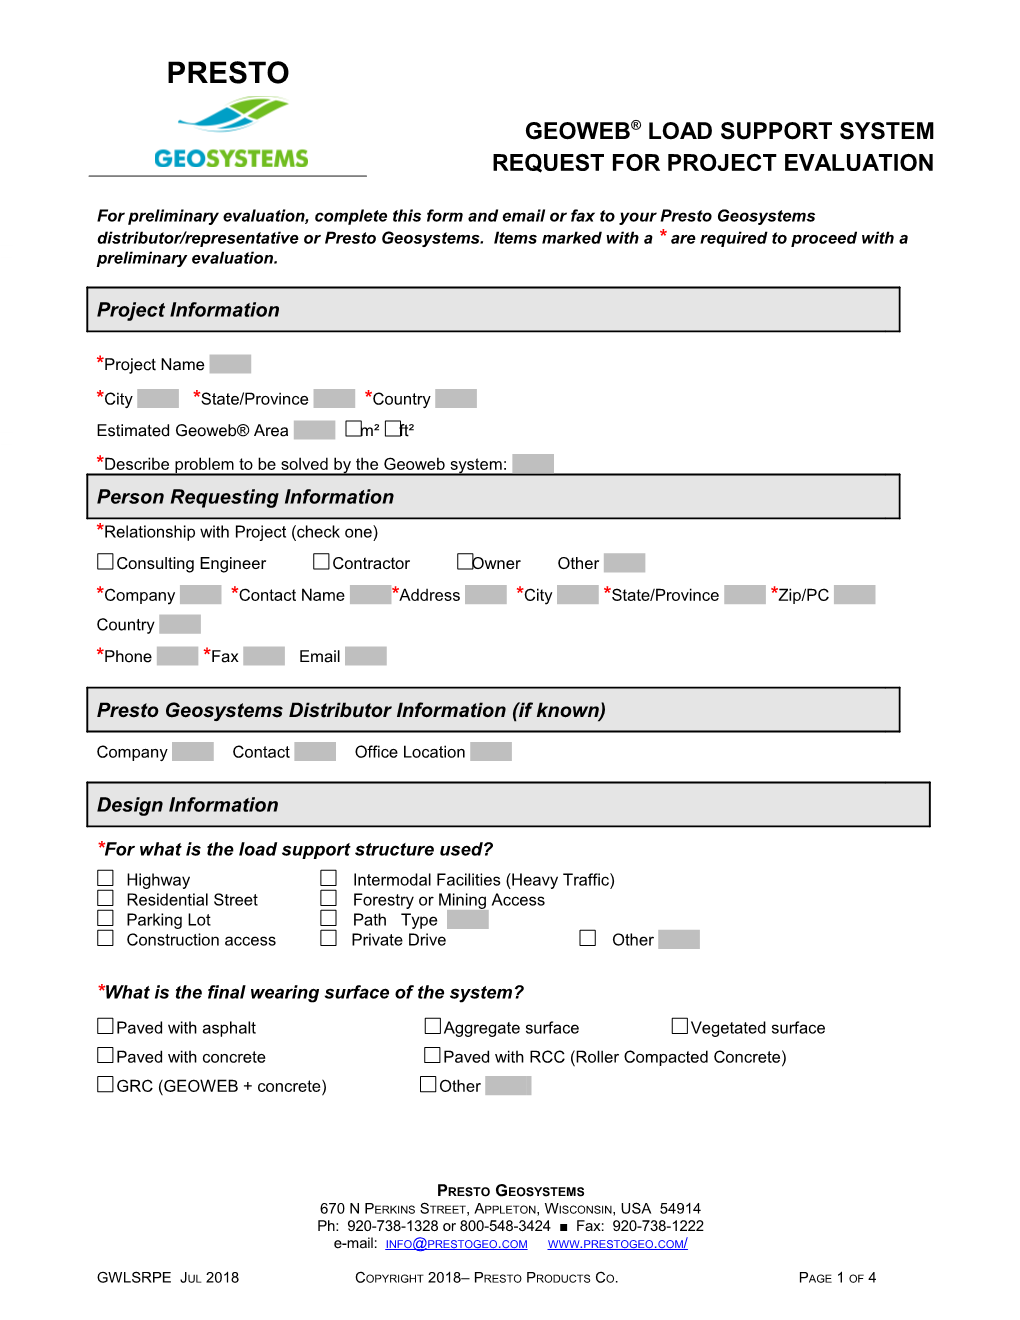 The Geoweb Load Support System Request for Project Evaluation